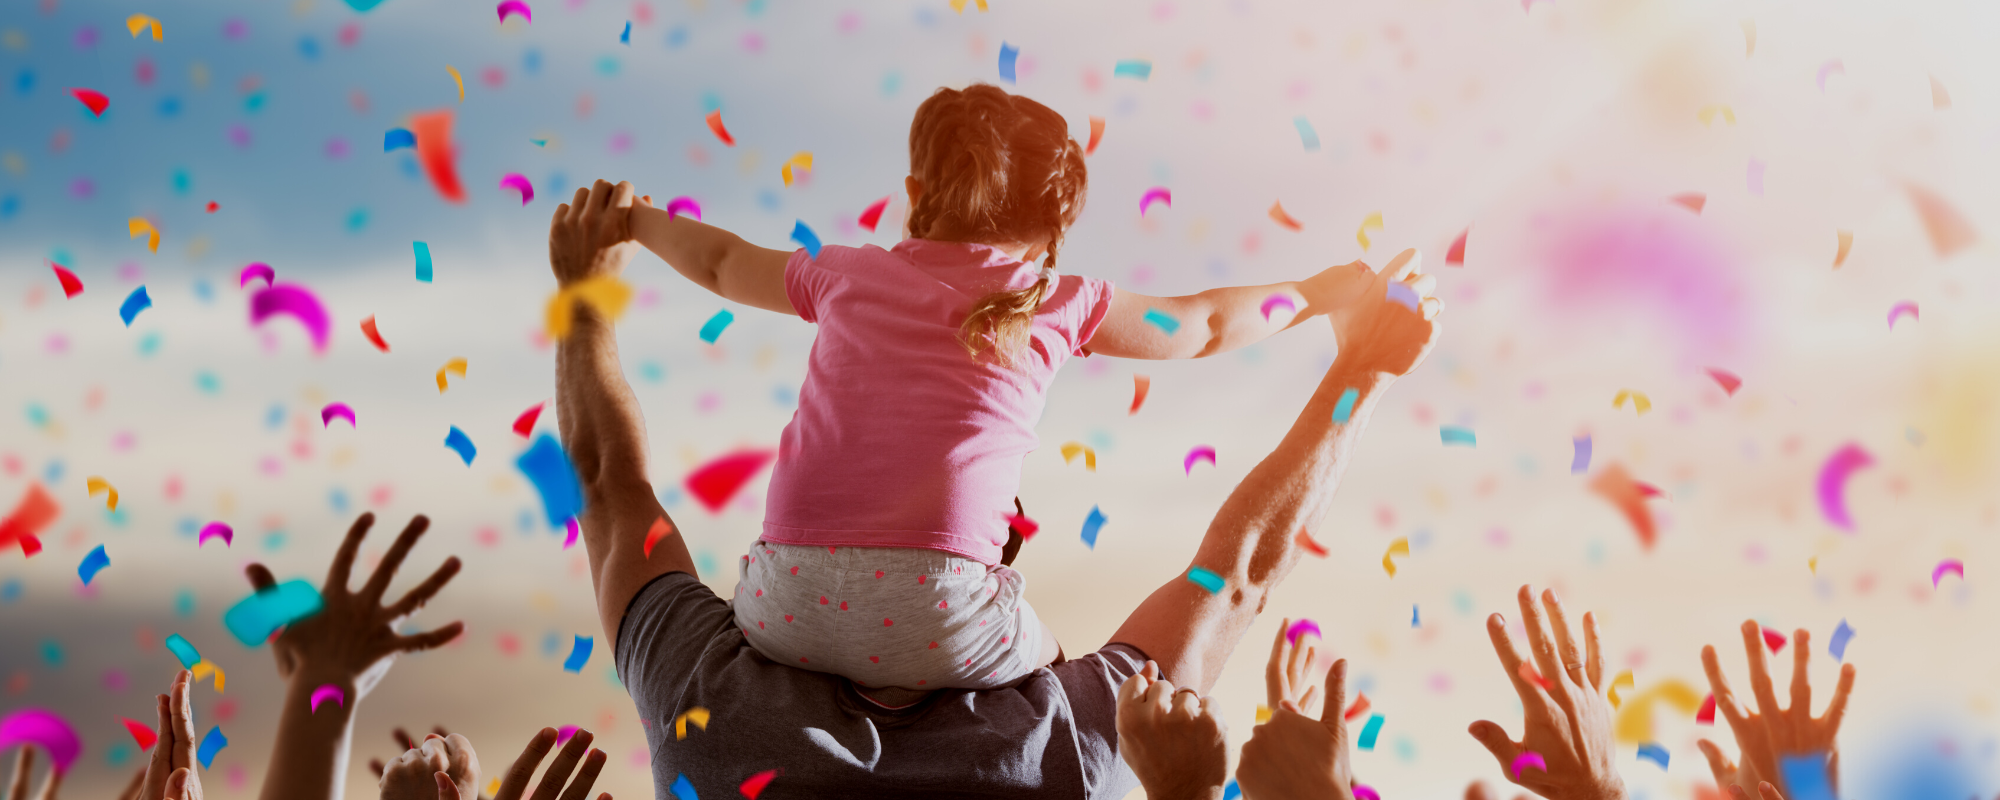 Child sitting on the shoulders of an adult with confetti falling and hands reaching upwards